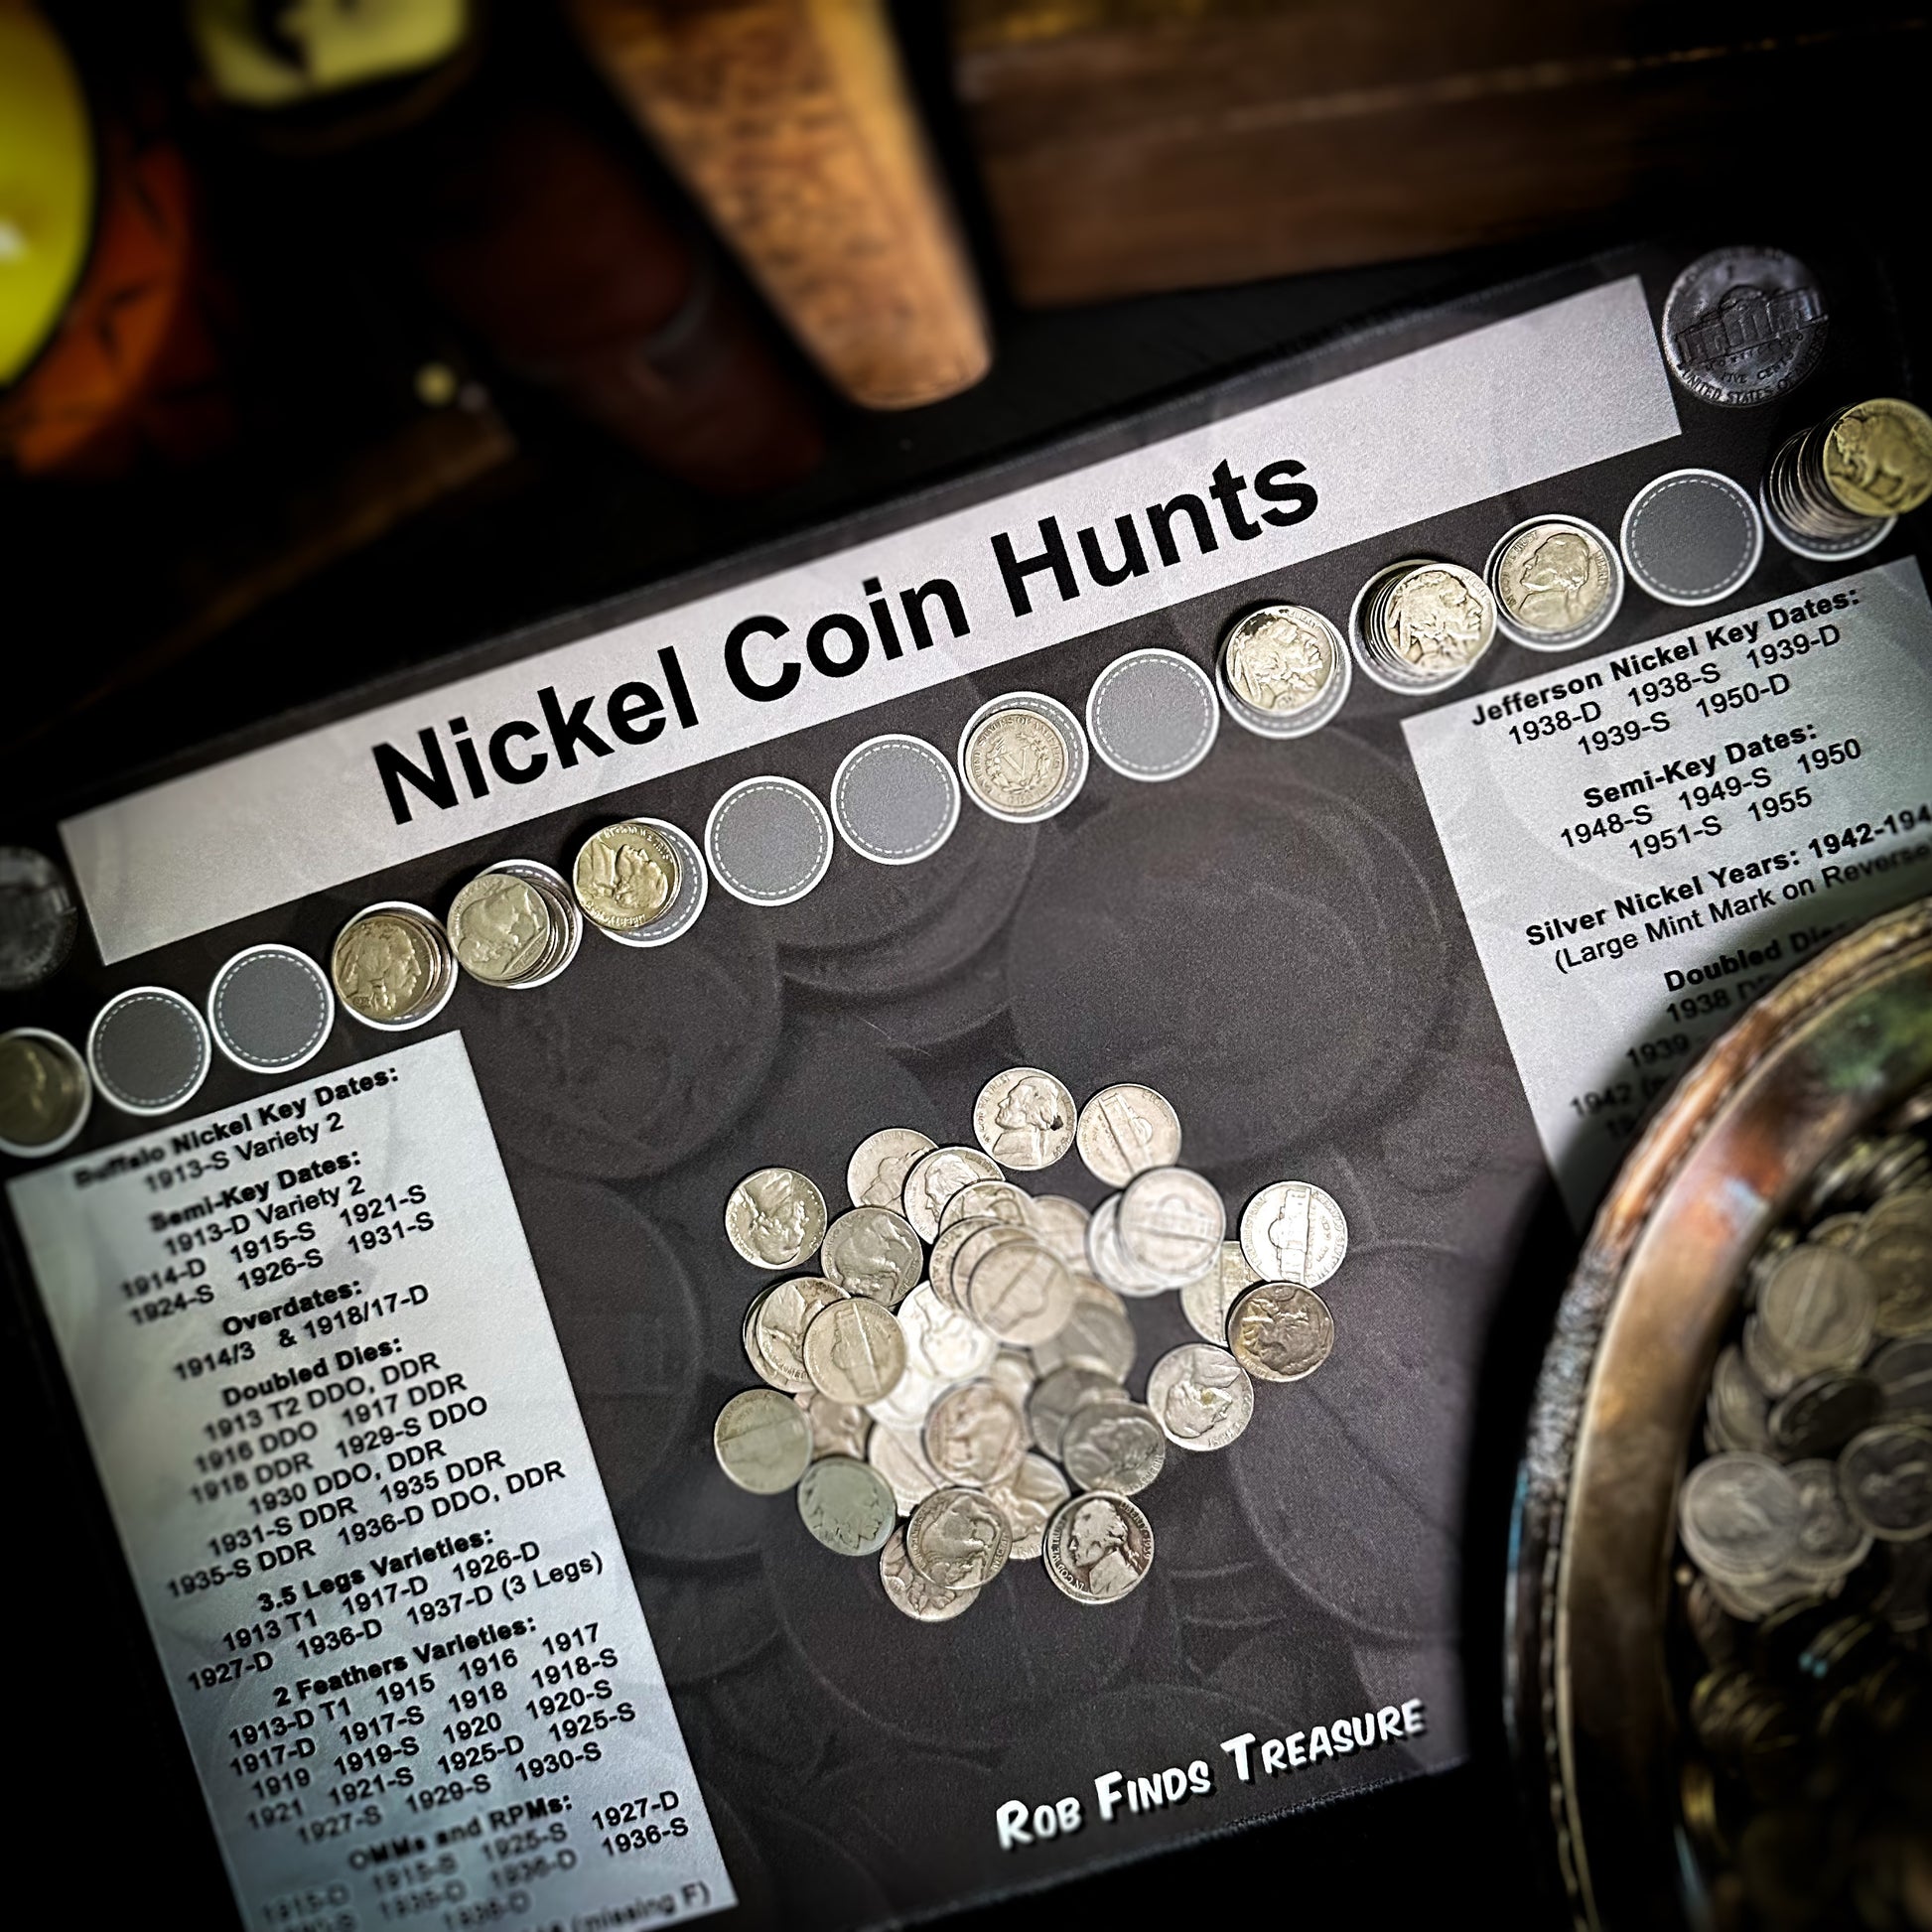 Layout with coins of a nickel coin roll hunting mat made by Rob Finds Treasure featuring organized rows for stacking nickels, providing a convenient and systematic setup for searching through coins 